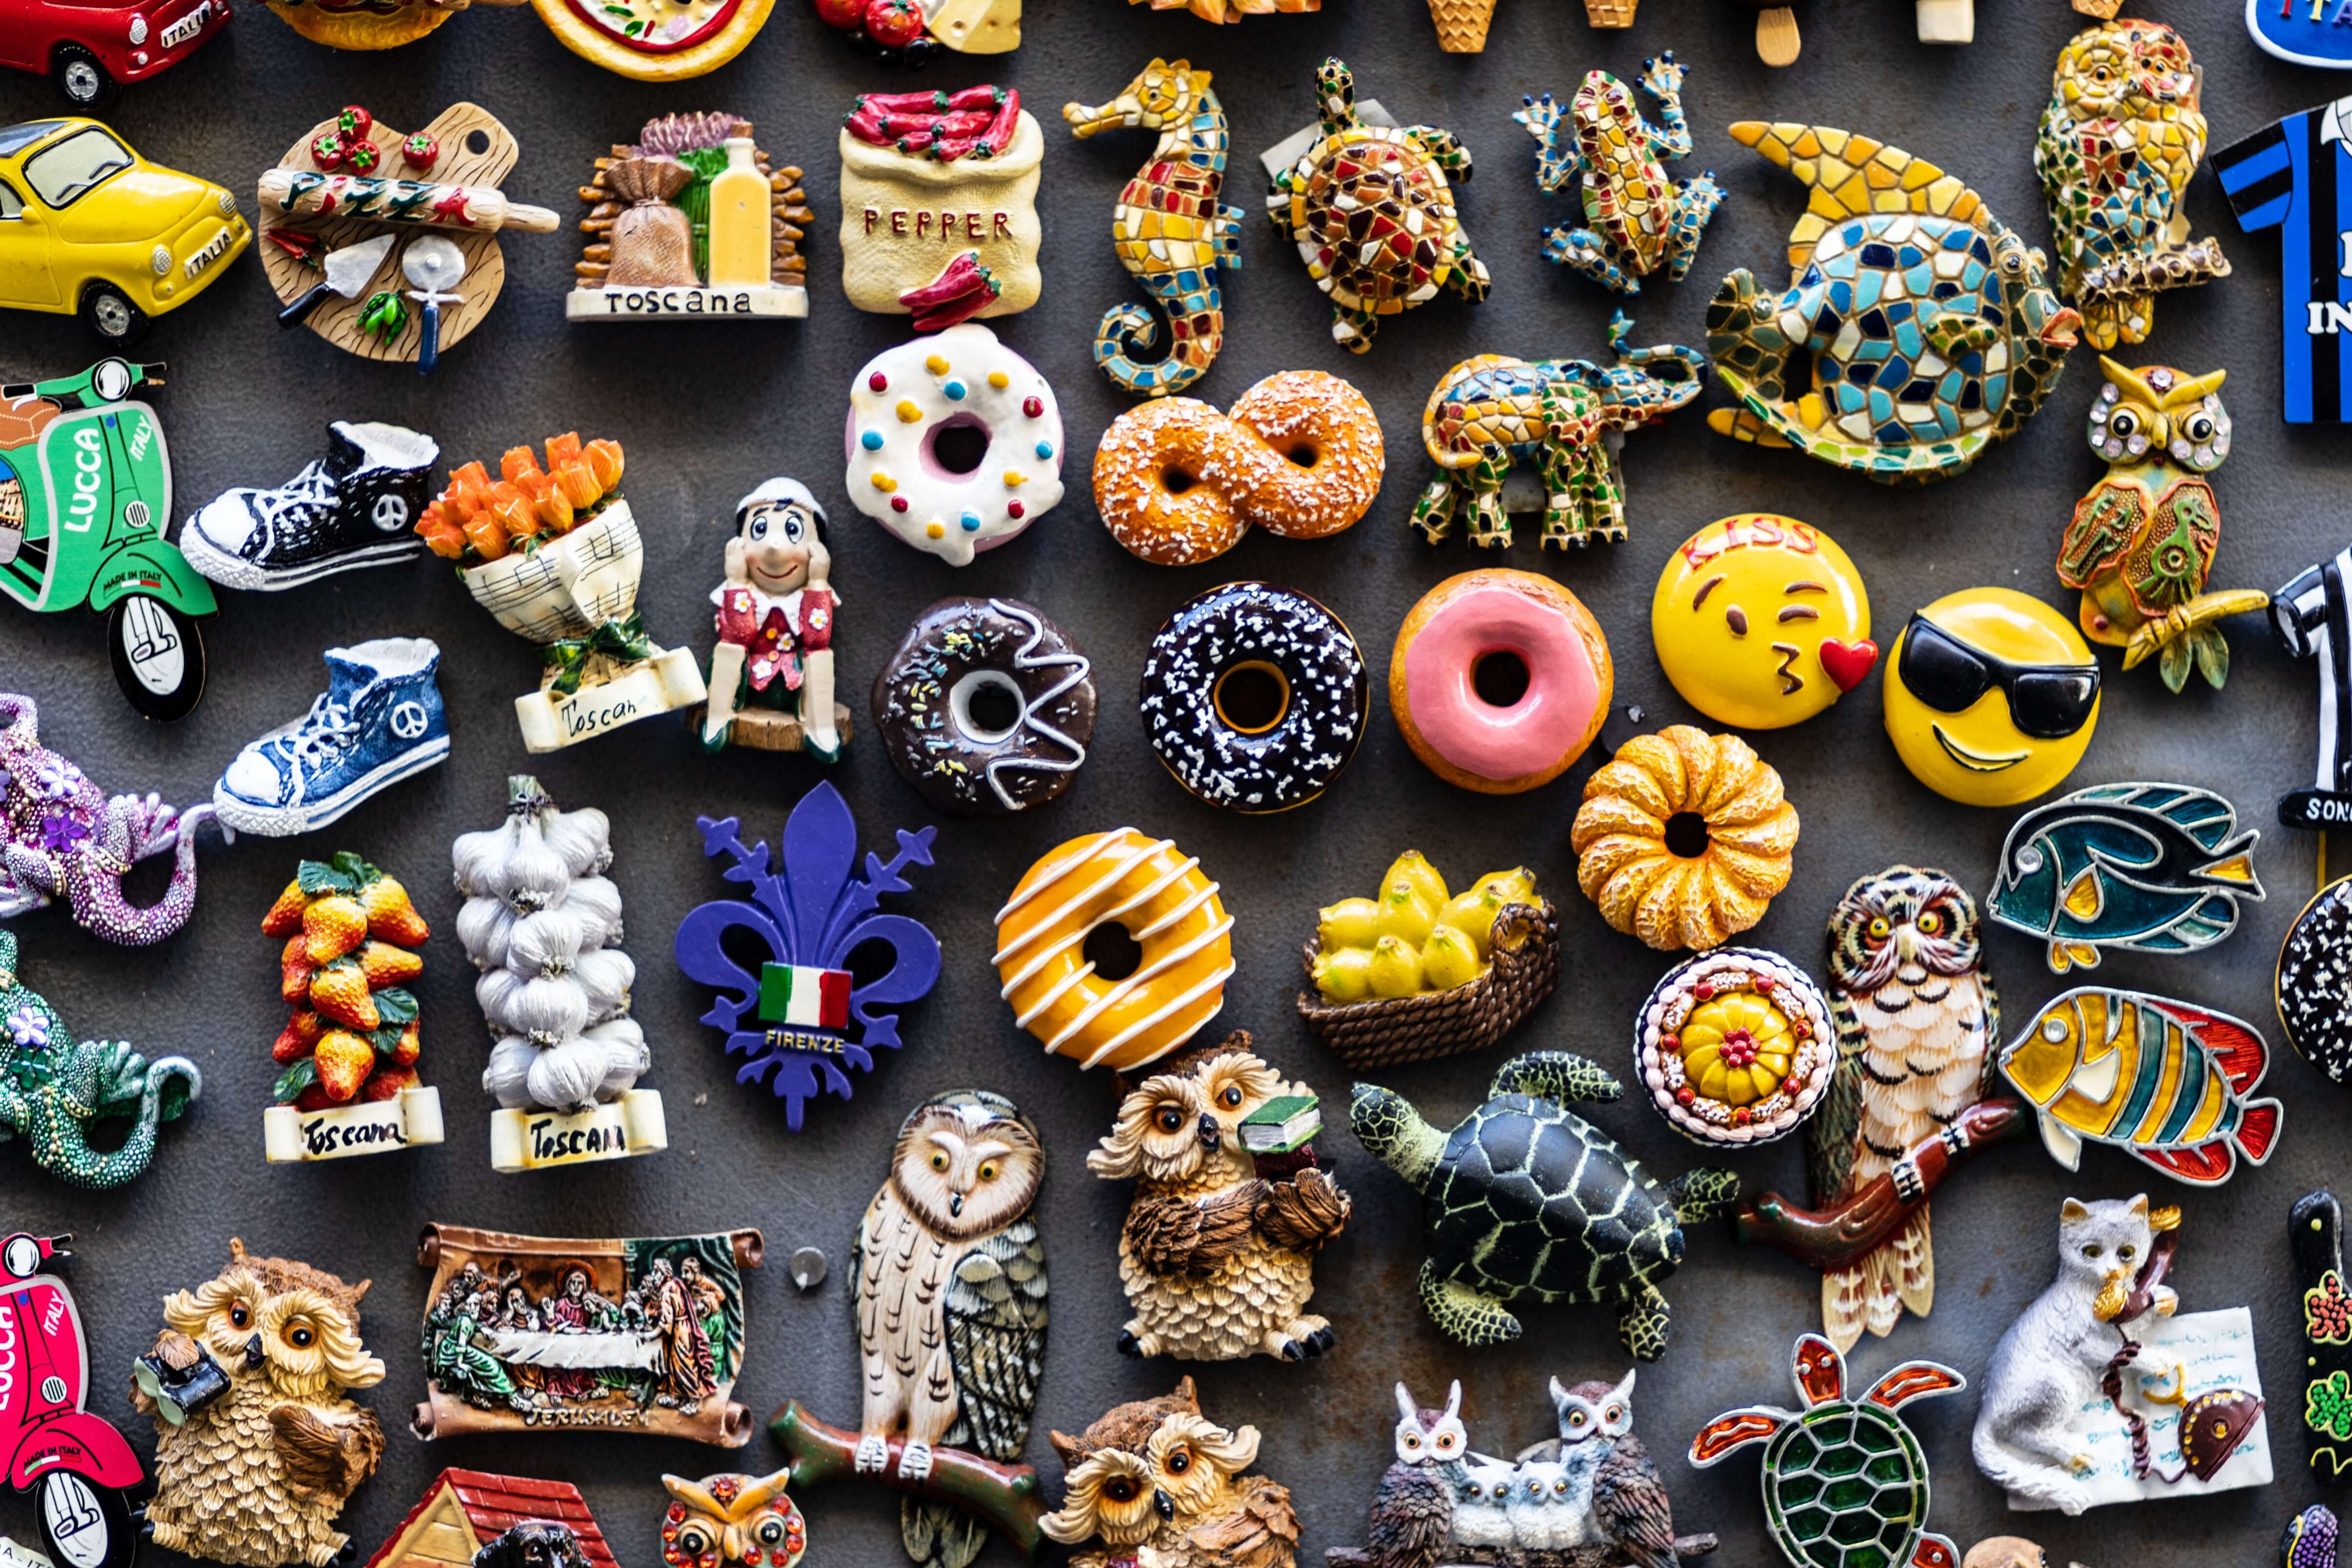 Magnets of various items including owls, donuts, emojis fish, and more